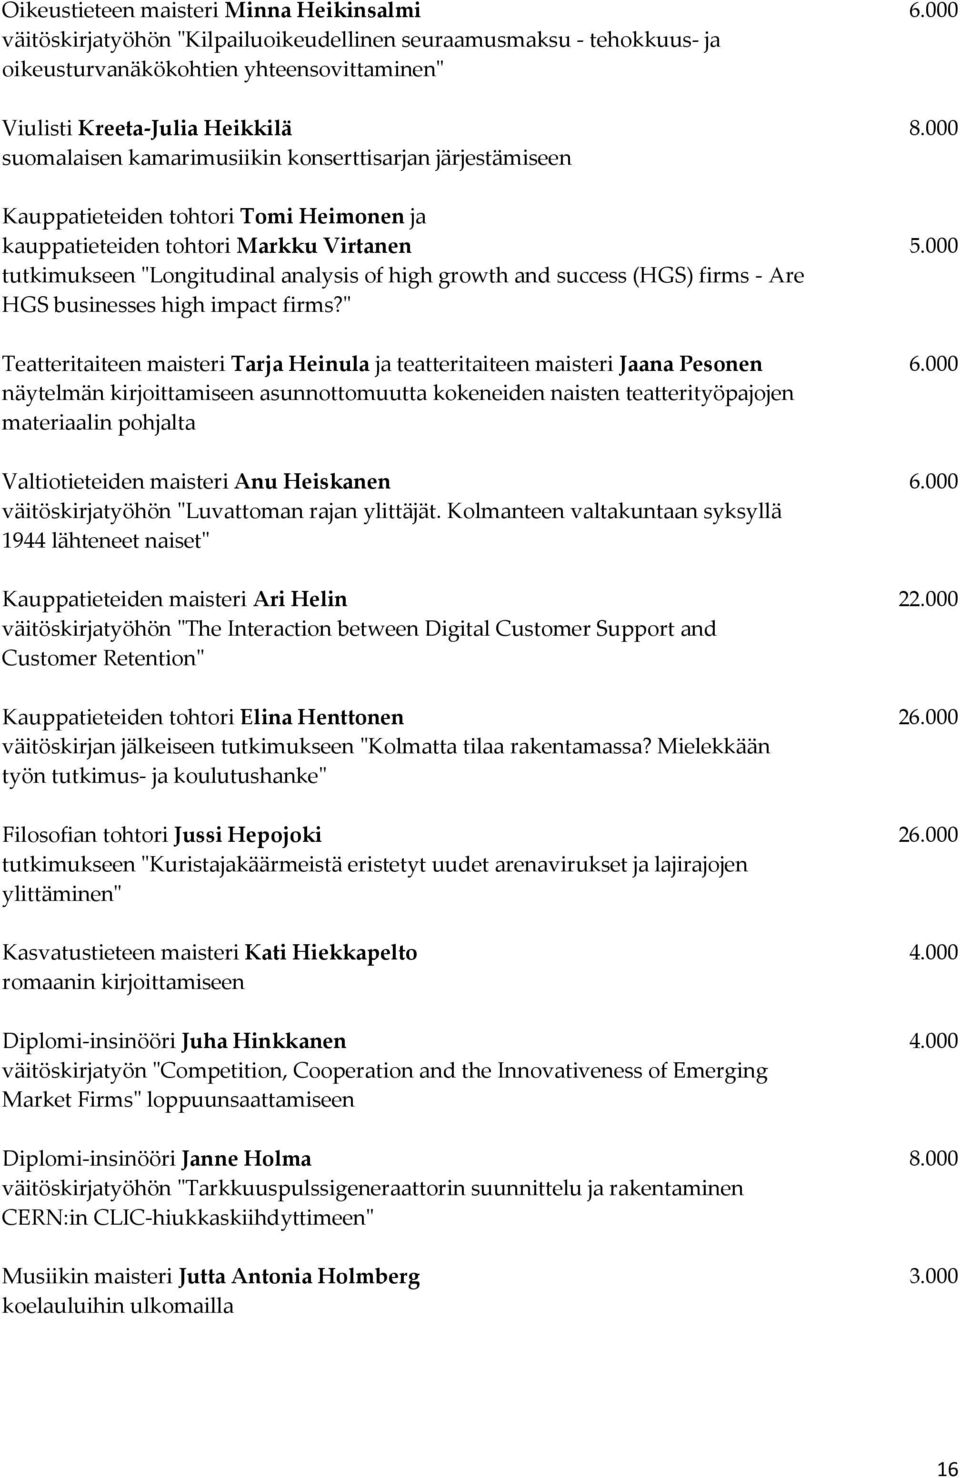 000 tutkimukseen "Longitudinal analysis of high growth and success (HGS) firms - Are HGS businesses high impact firms?